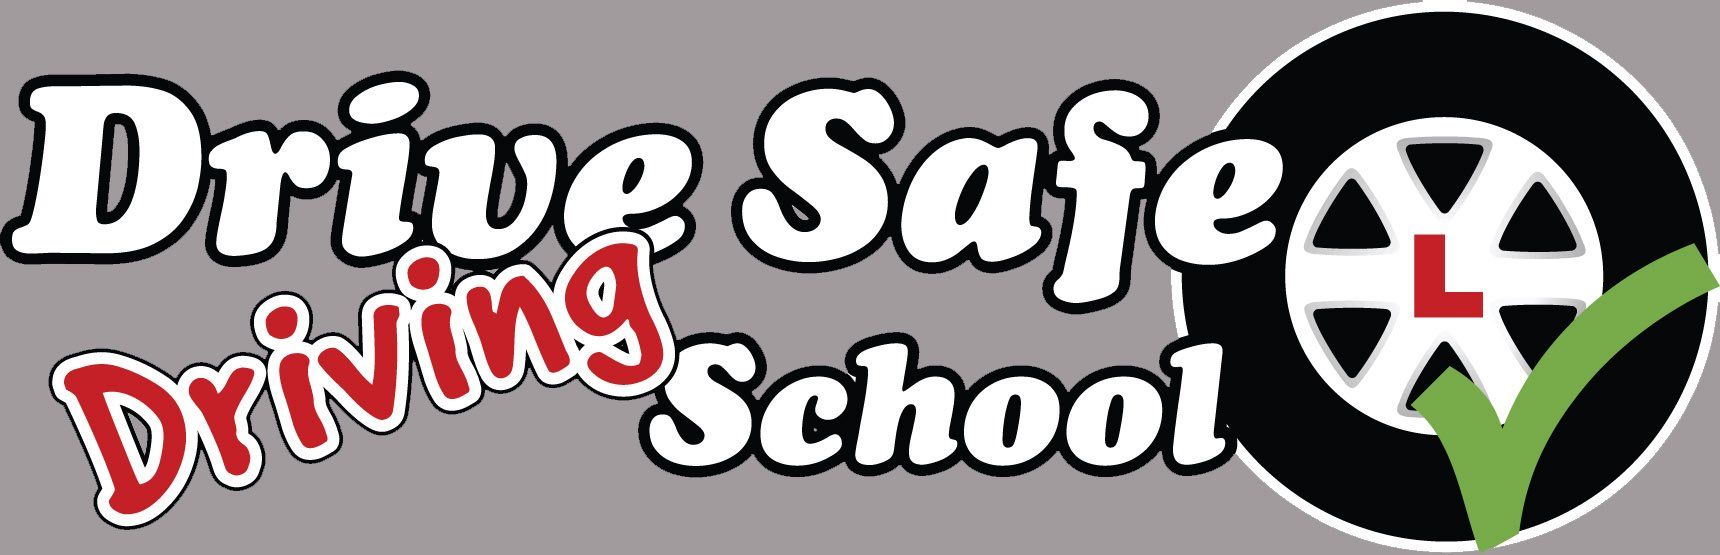 Drive Safe Driving School in Grimsby, Cleethorpes and Immingham